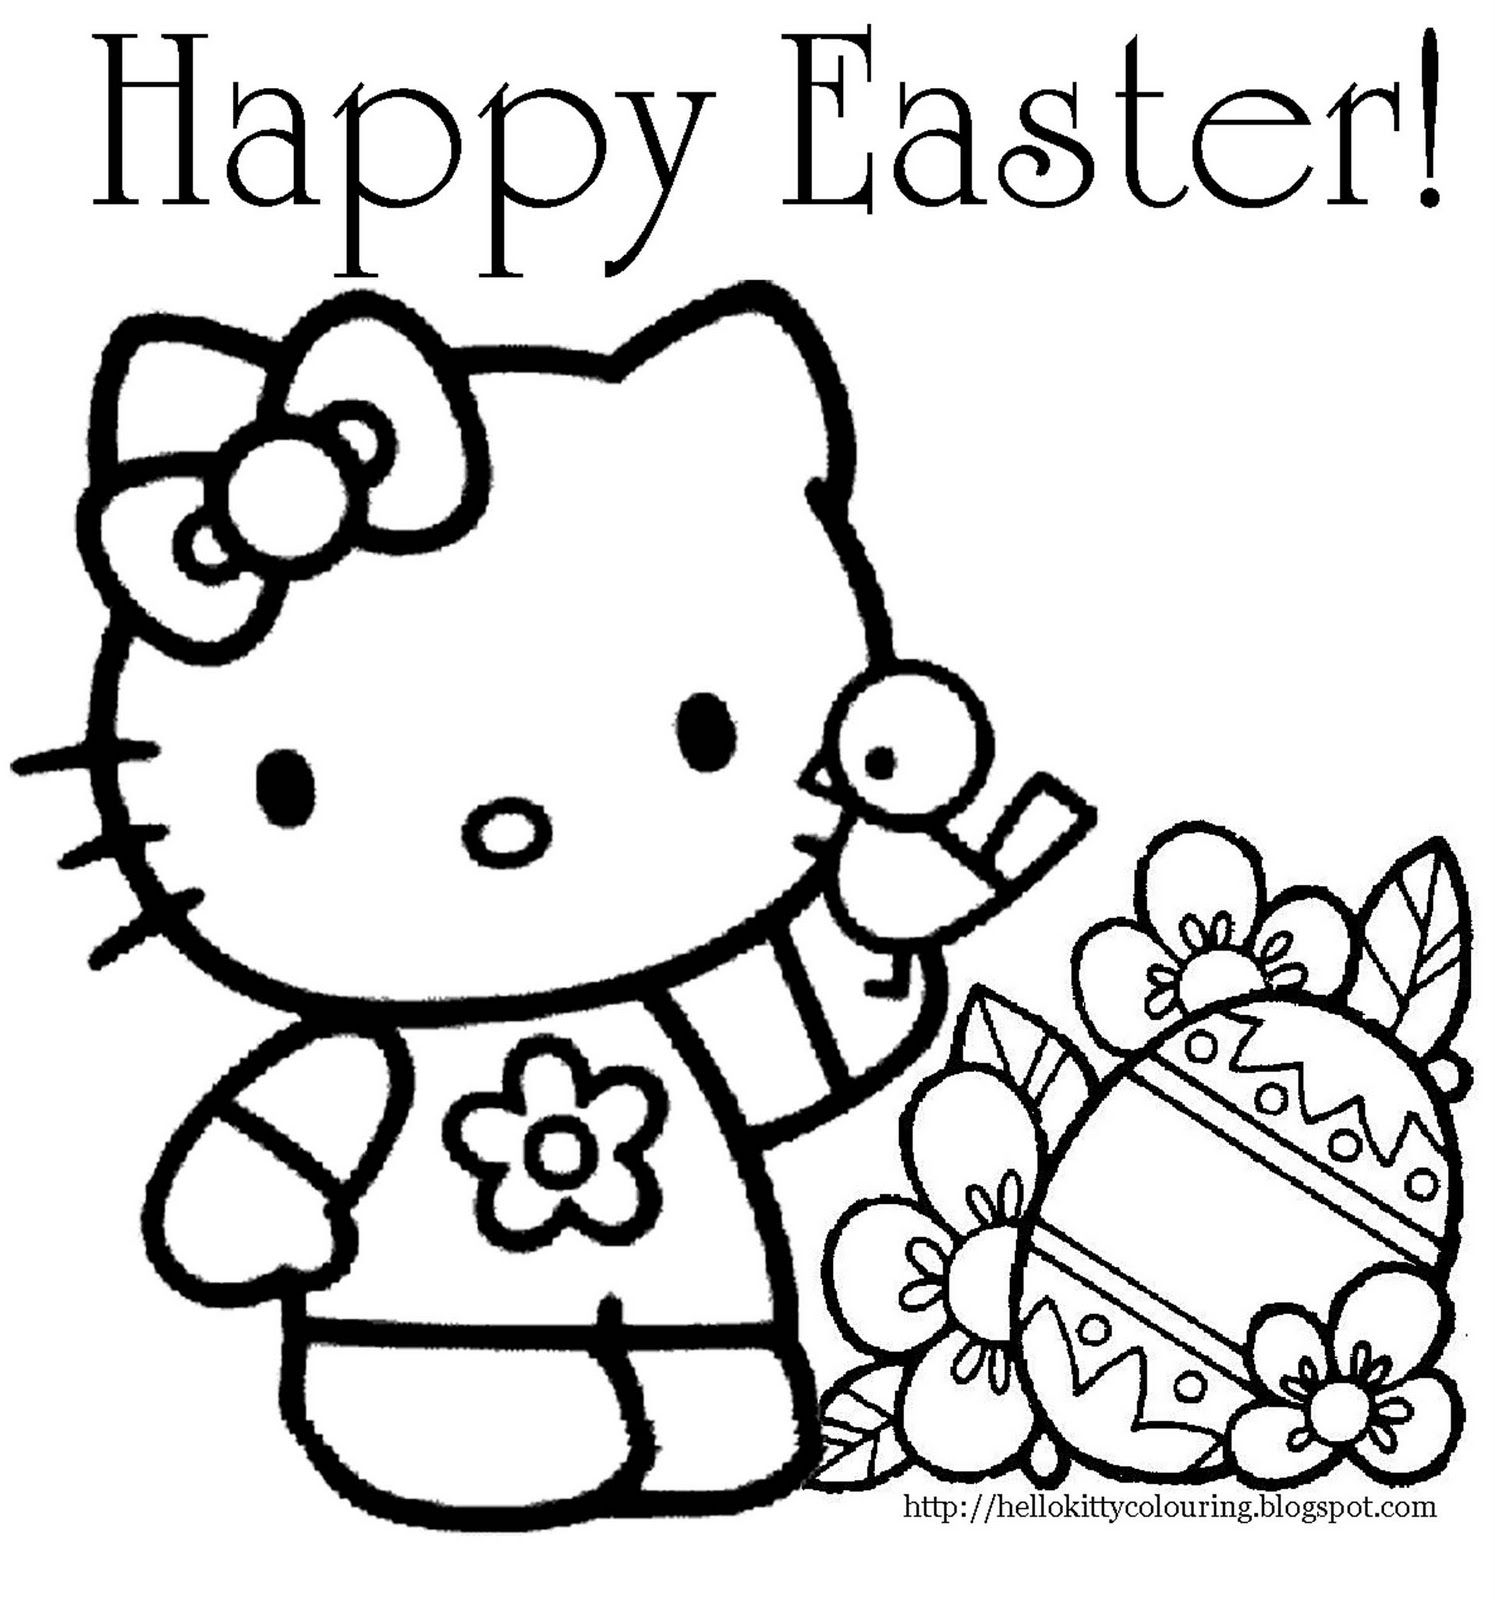 Coloring Pages For Easter Printable - Coloring Home